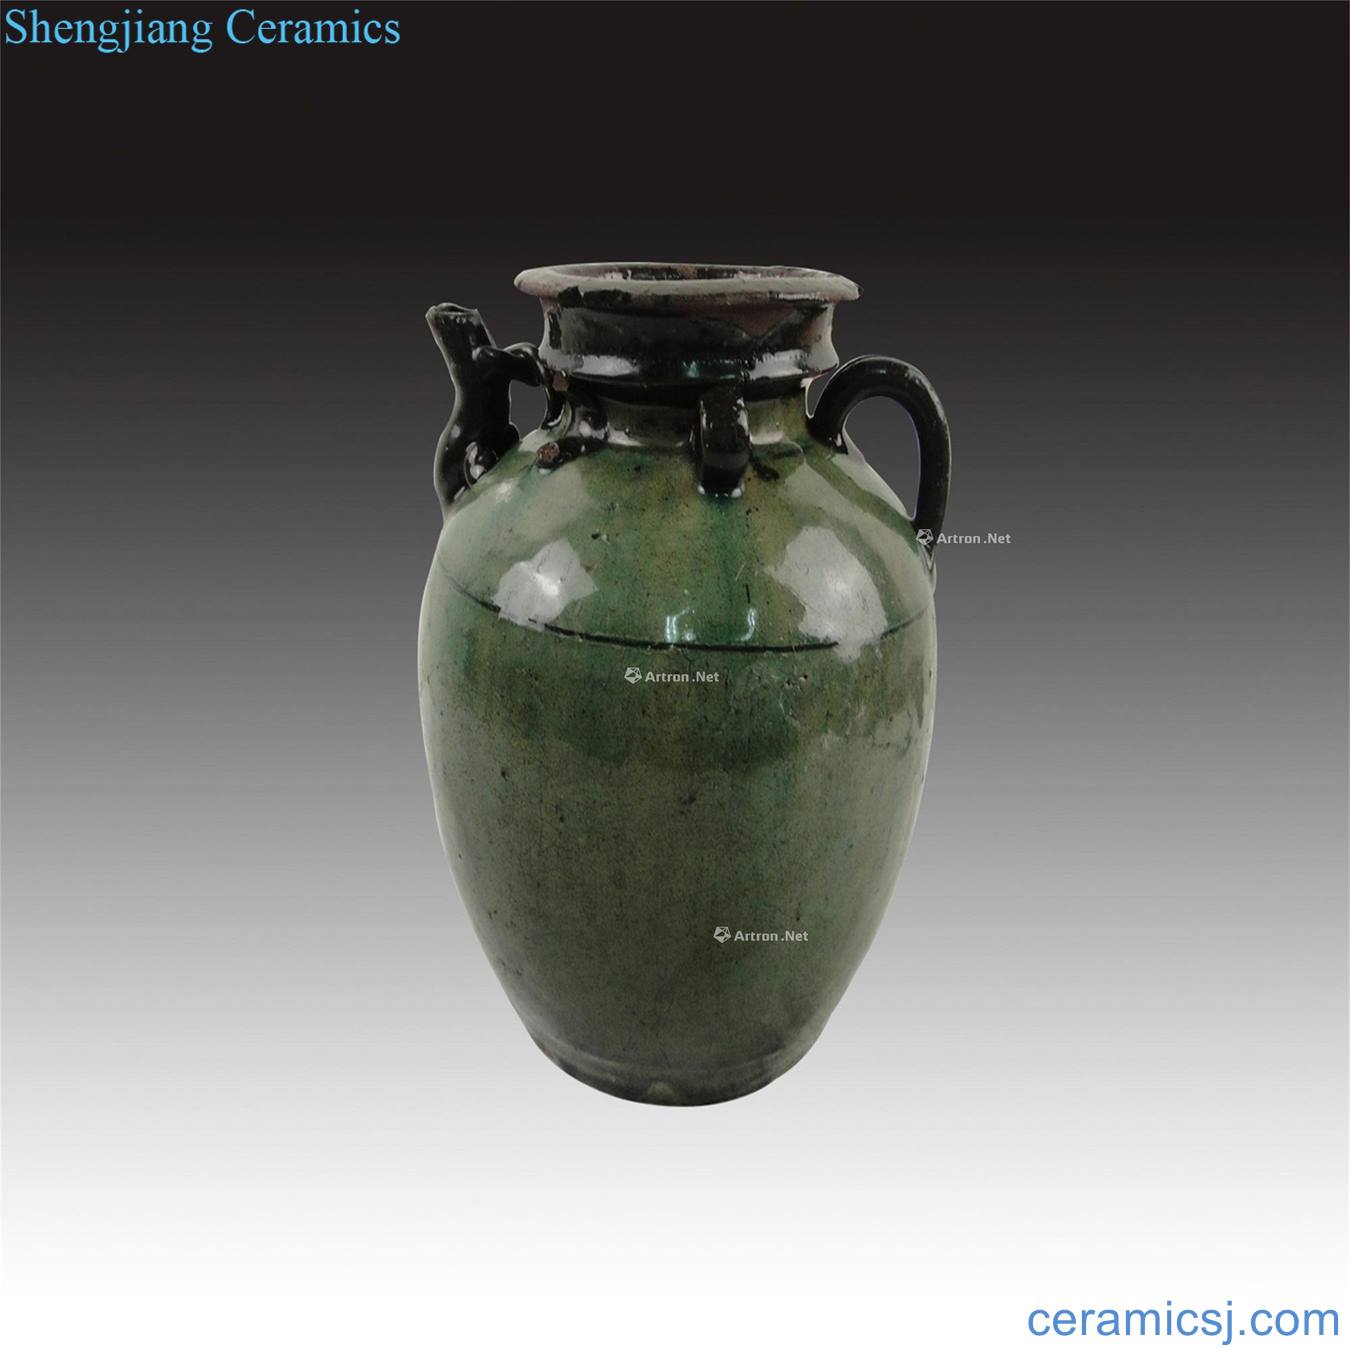 The yuan dynasty green glaze of quaternary cans